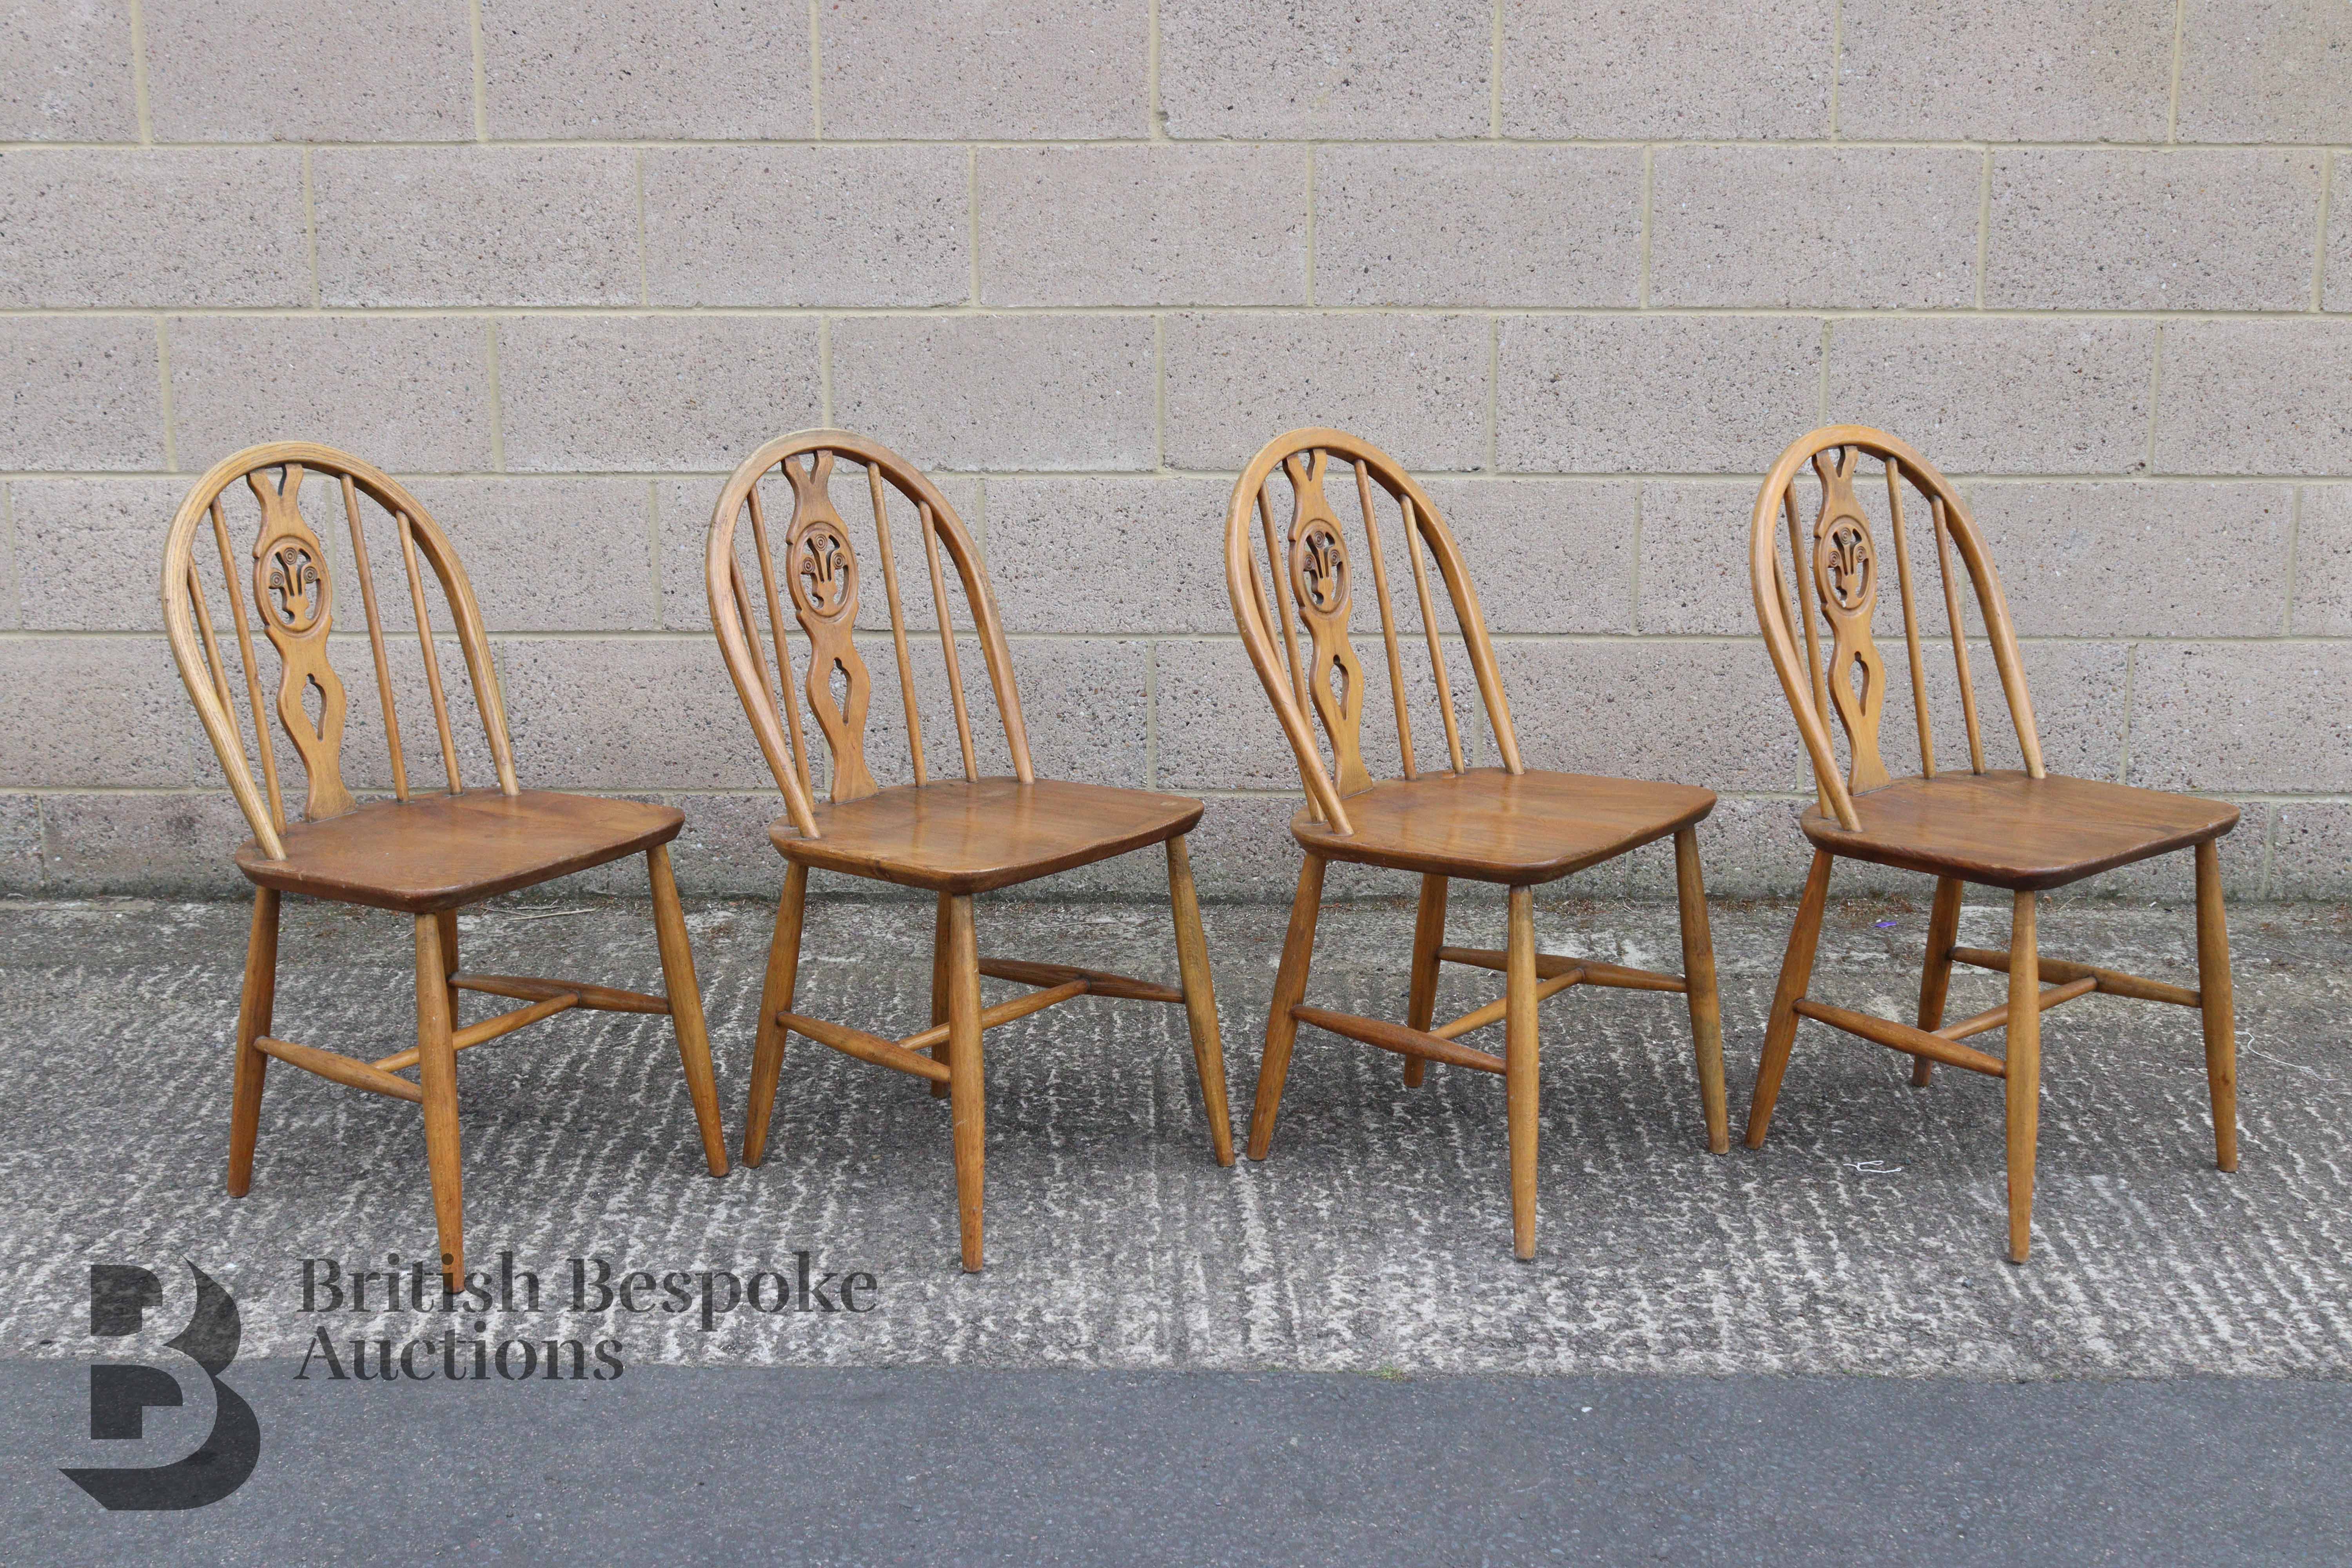 Ercol Spindle back Chairs - Image 3 of 6